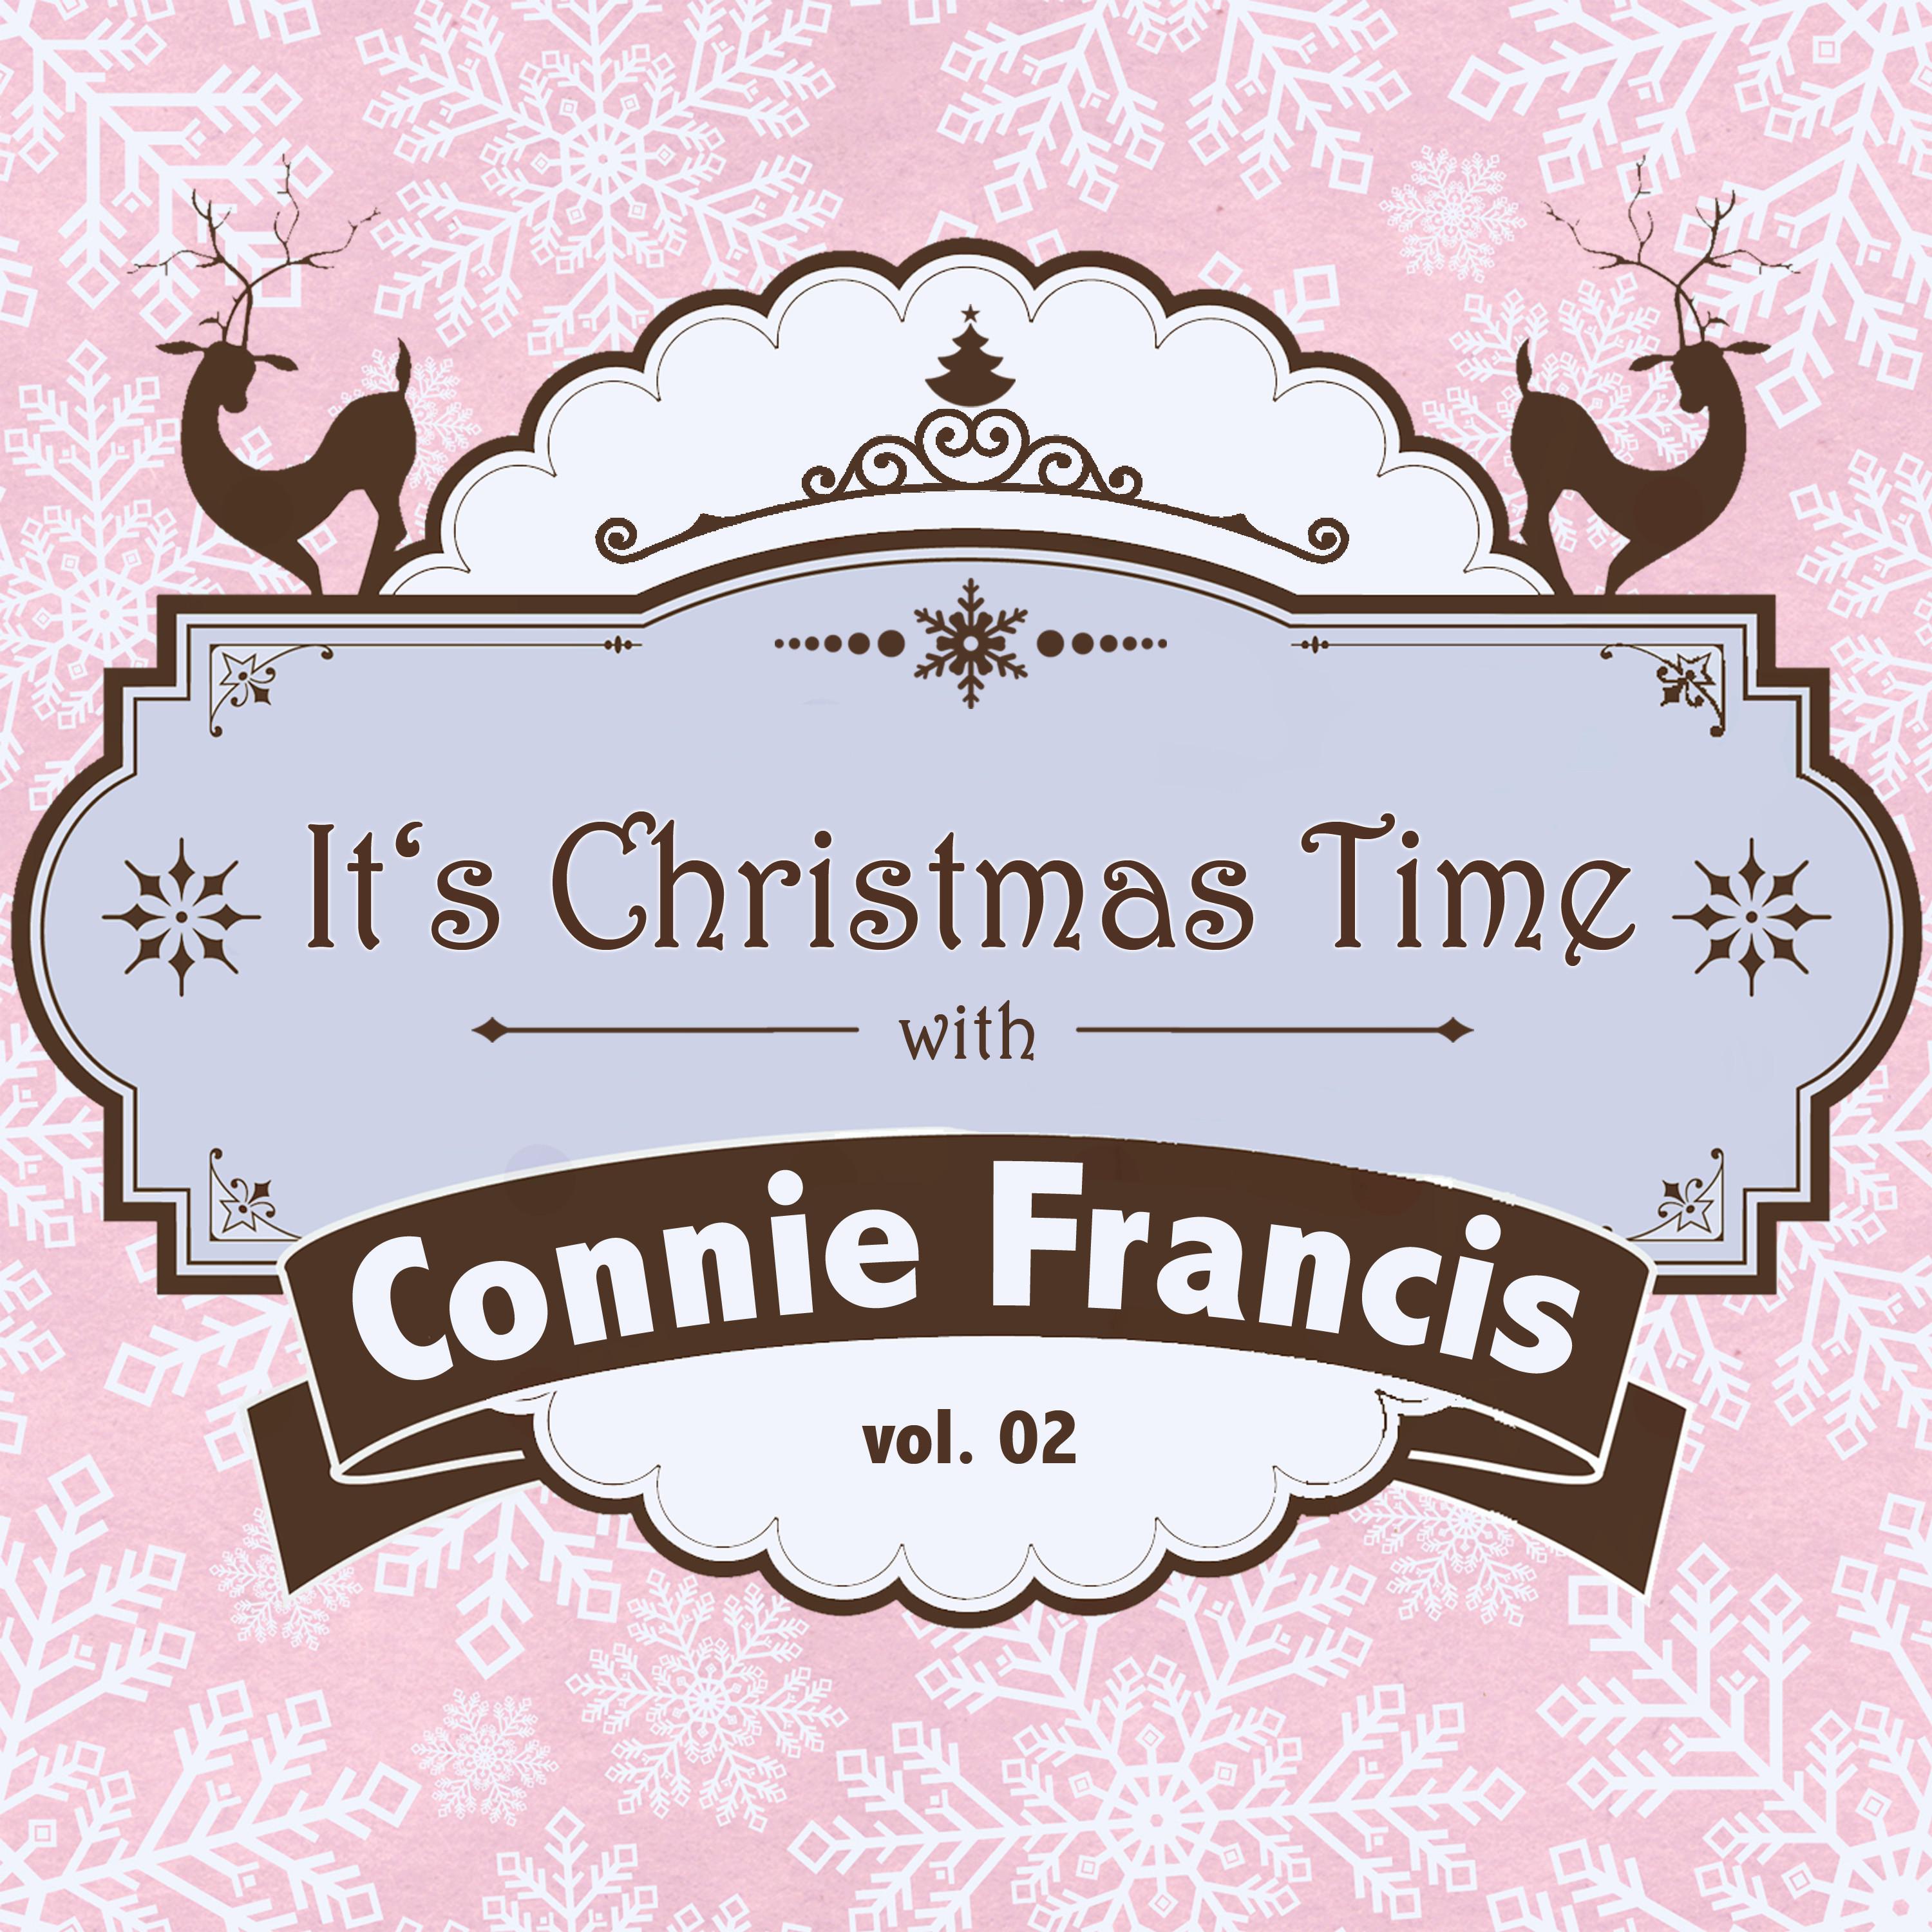 It's Christmas Time with Connie Francis, Vol. 02